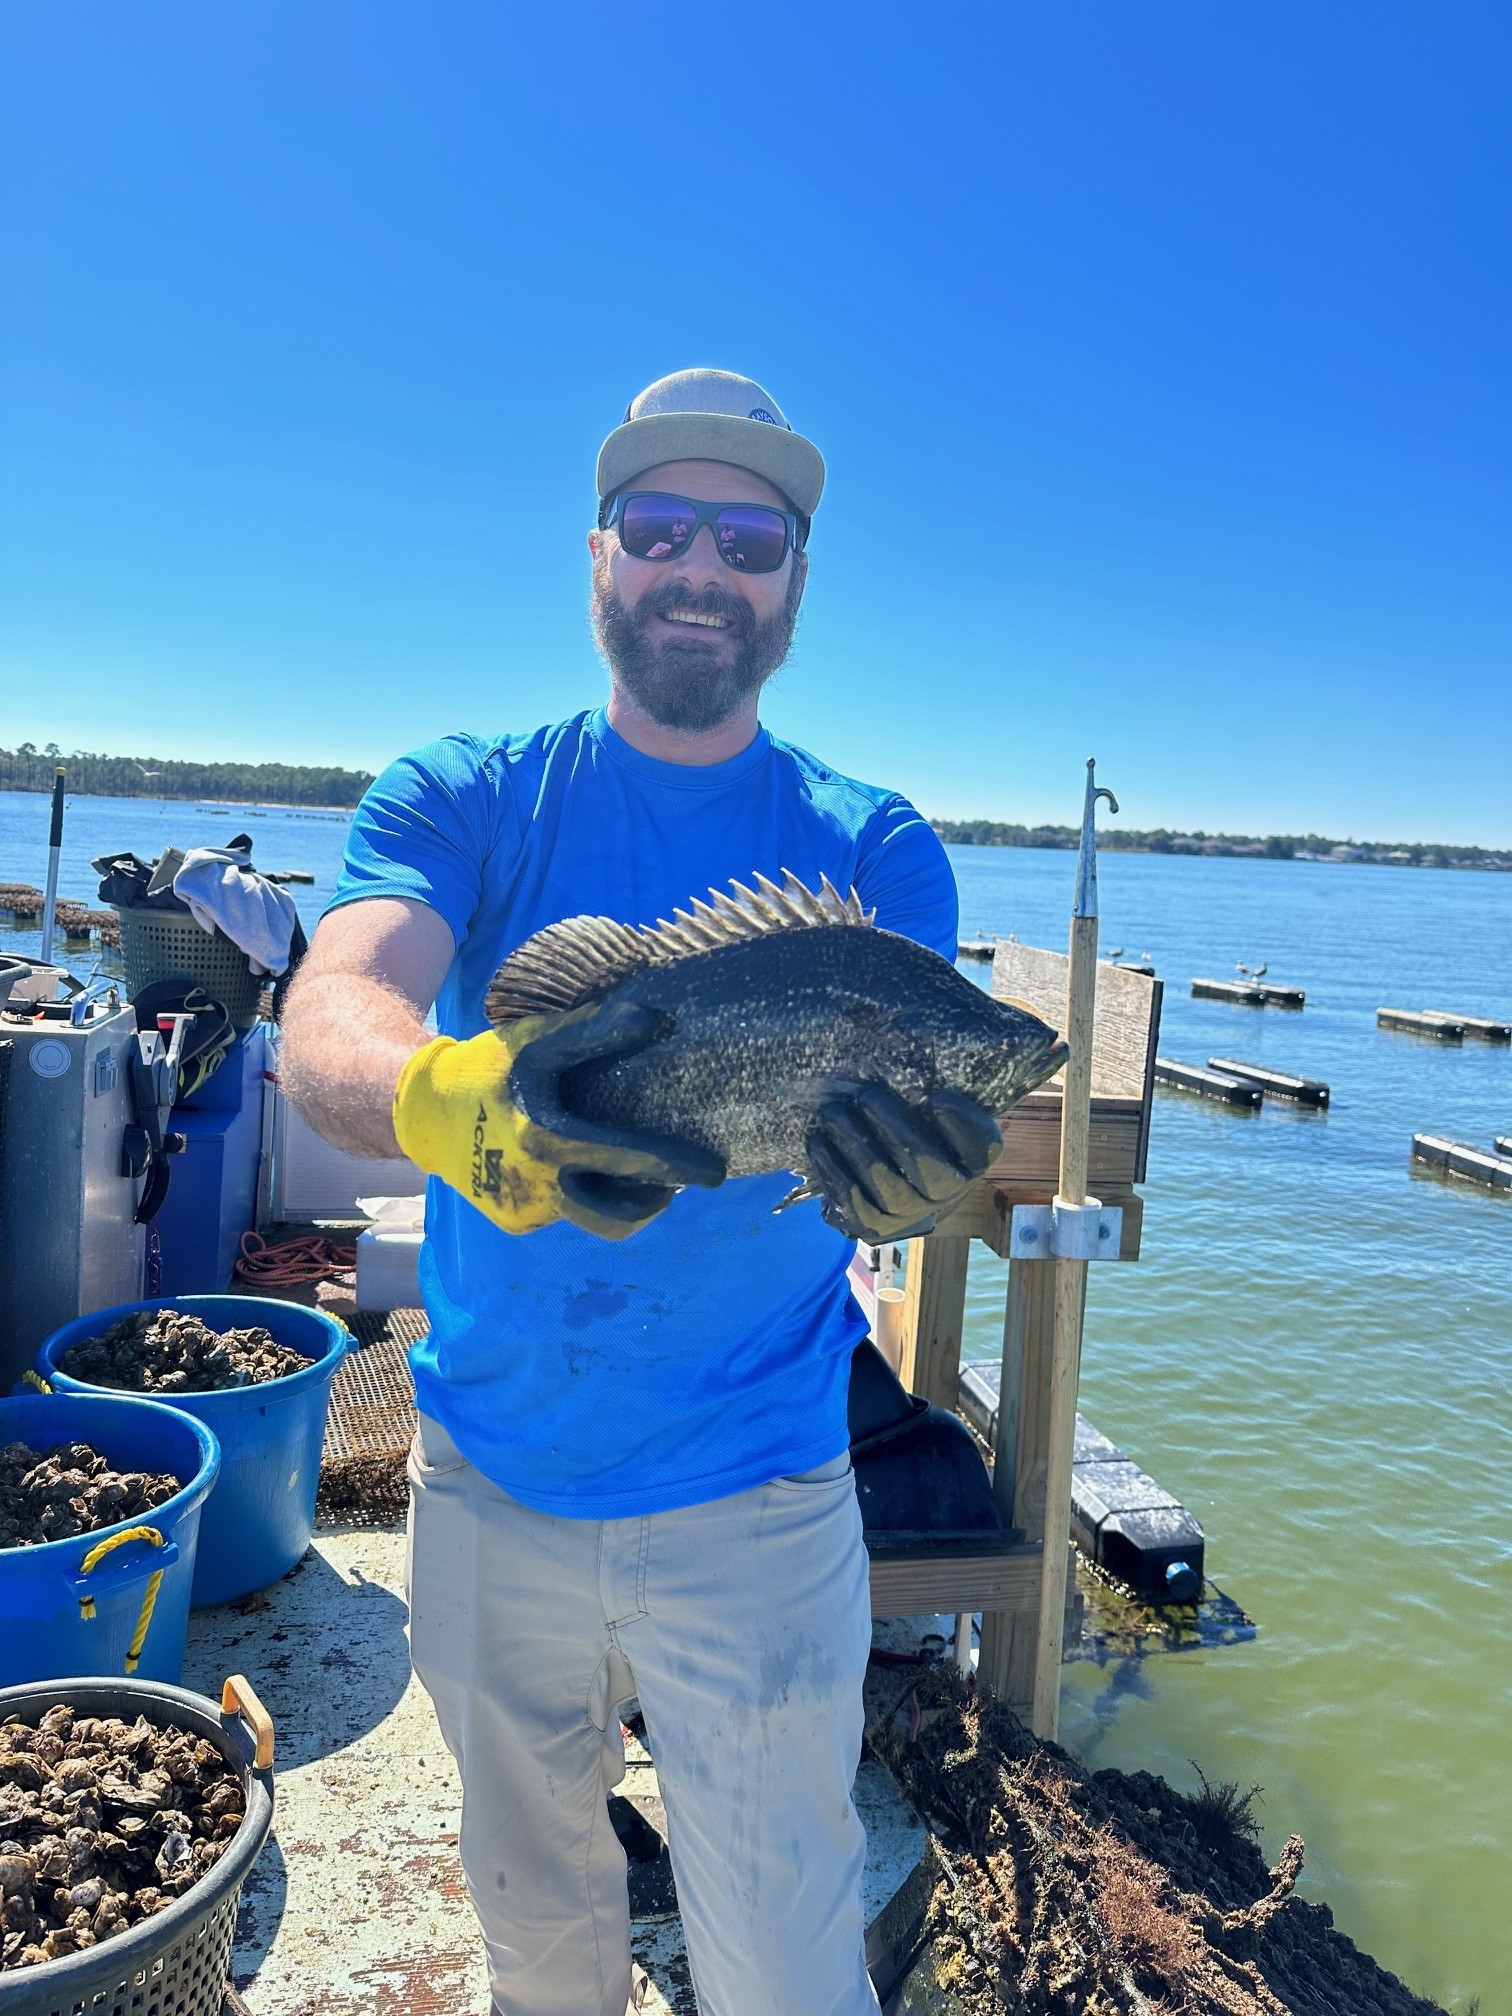 Oyster Farmer holding a Tripletail fish